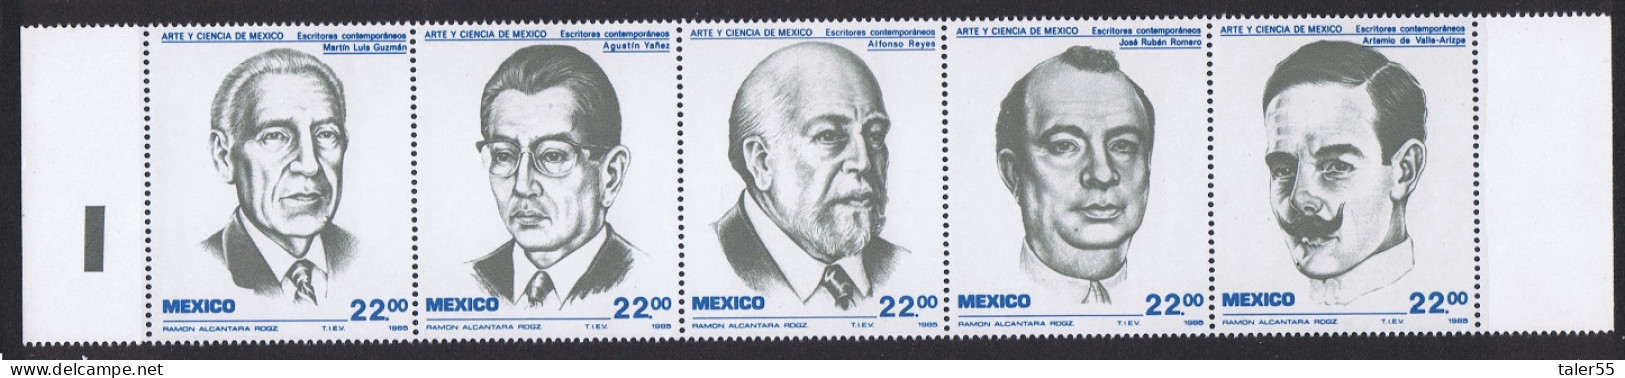 Mexico Mexican Scientists Strip Of 5 Unfolded 1985 MNH SG#1750-1754 Sc#1397a - Messico